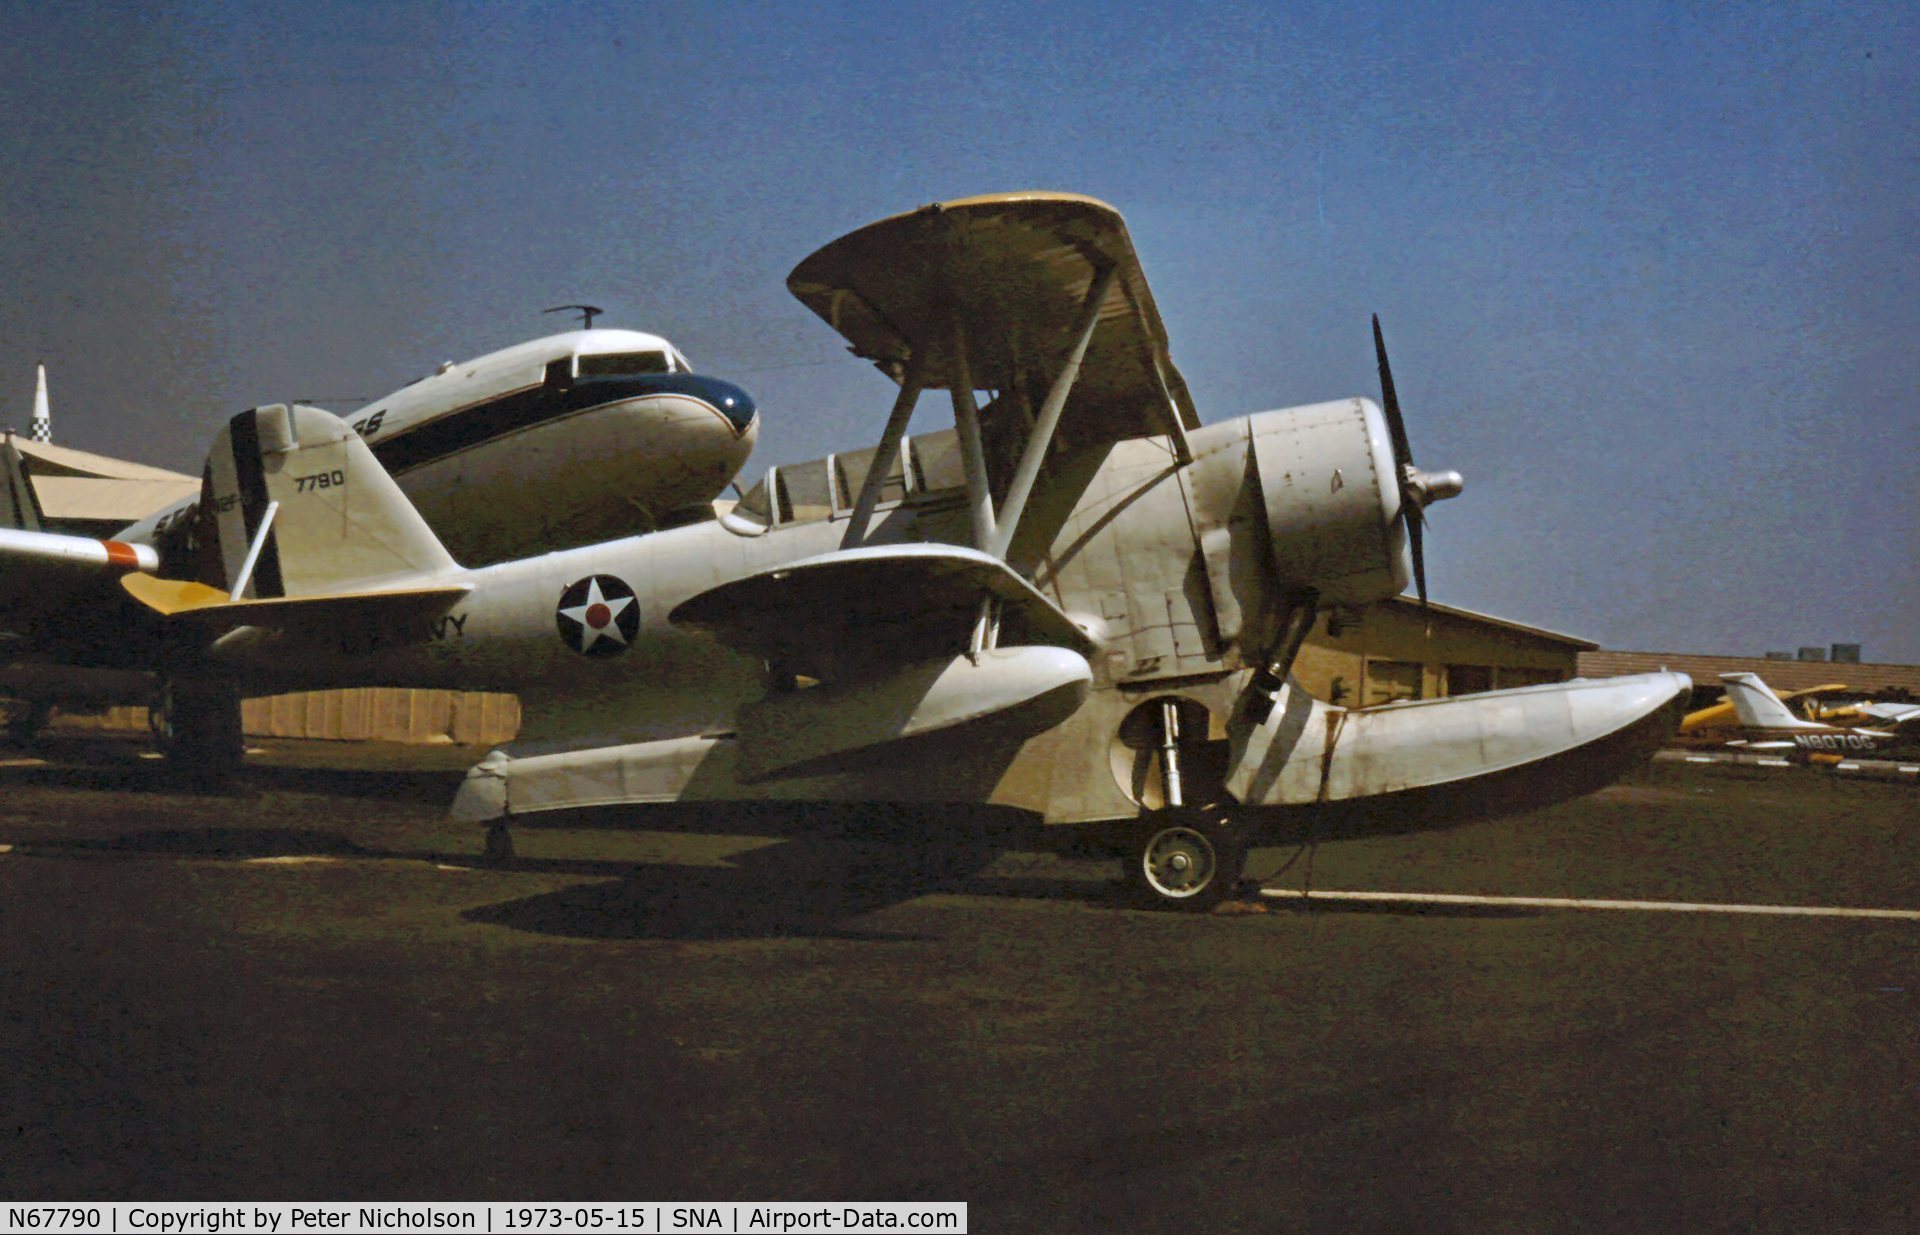 N67790, 1945 Grumman J2F-6 Duck C/N 33587, In 1973 this Duck was part of the Tallmantz Collection at Orange County Airport, having been used in the film 